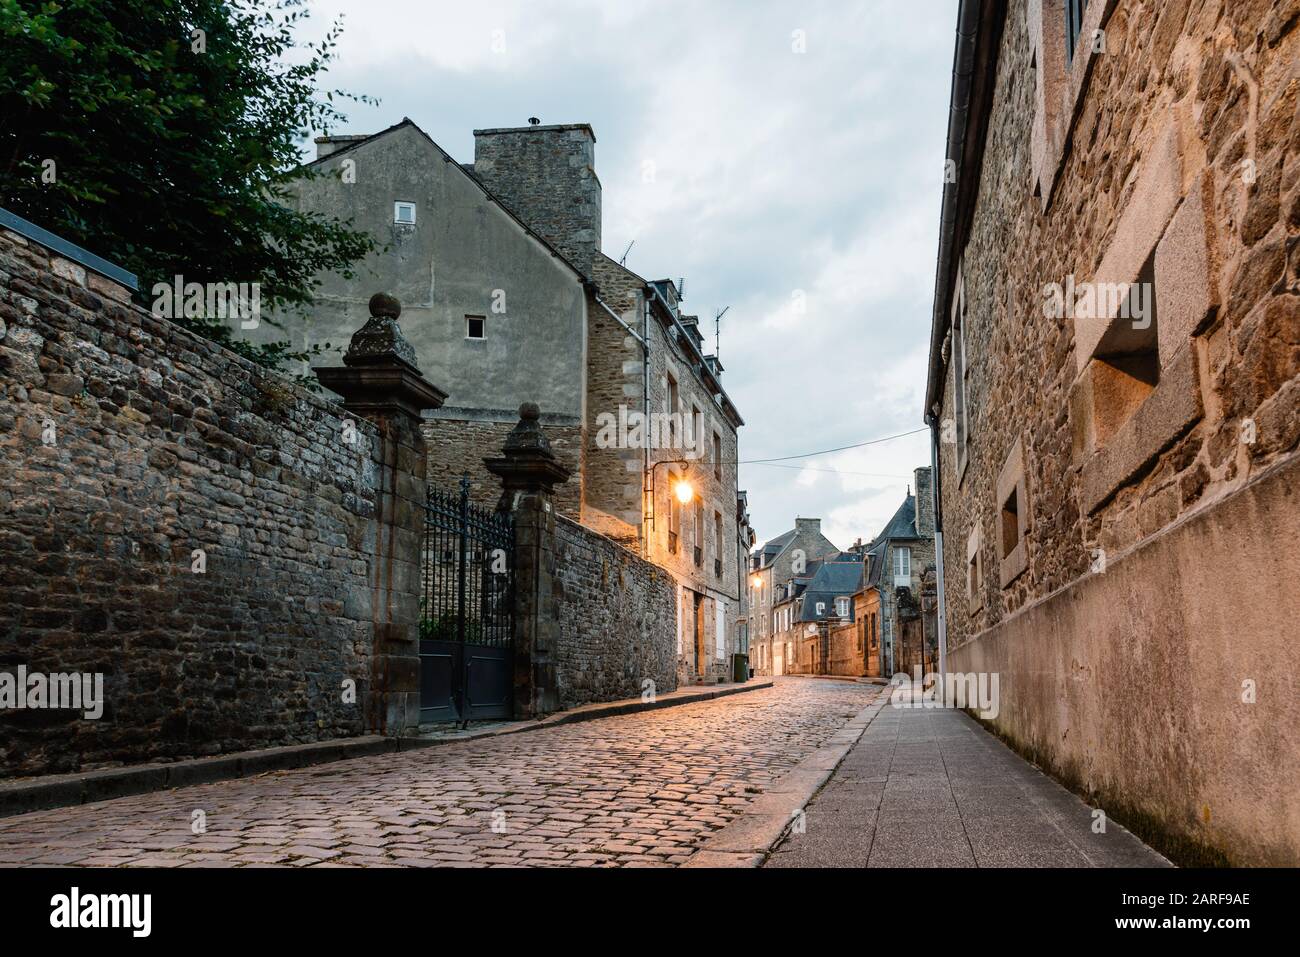 Old cobblestoned street with stone medieval houses in the town centre of Dinan, French Brittany. Stock Photo